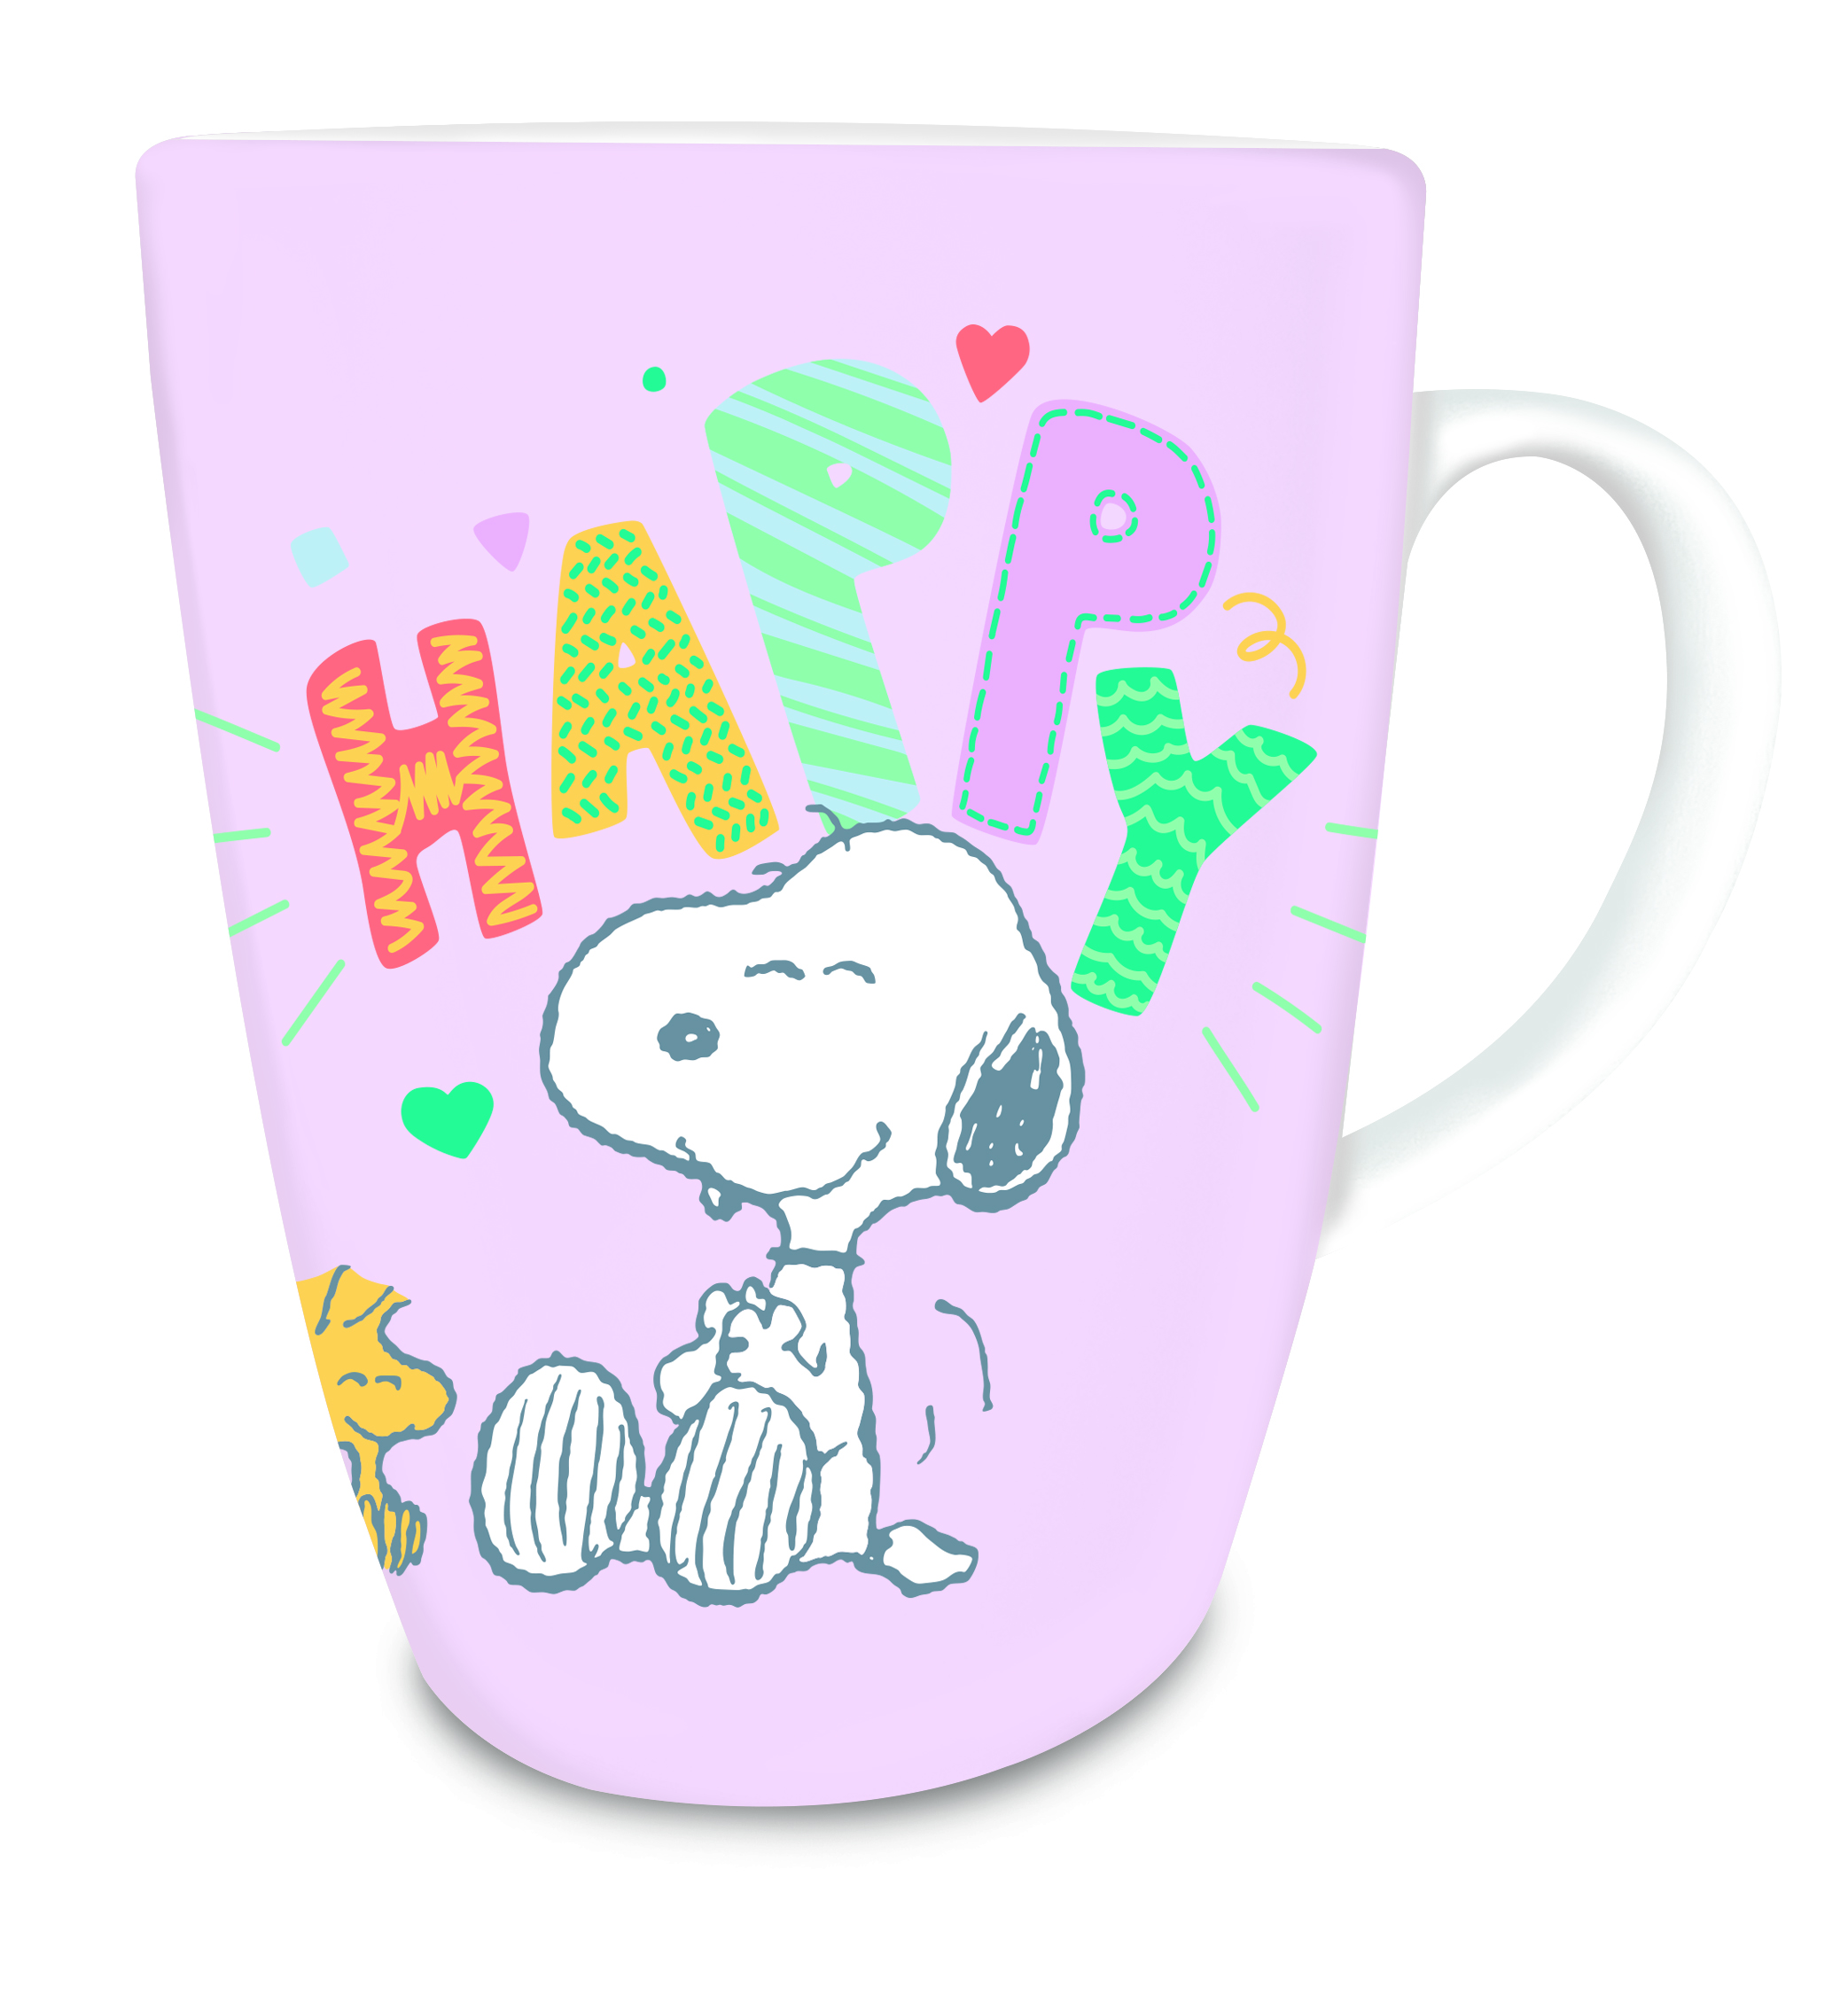 Get a free limited edition Peanuts Snoopy Cup with purchase of Darlie toothpastes - 3